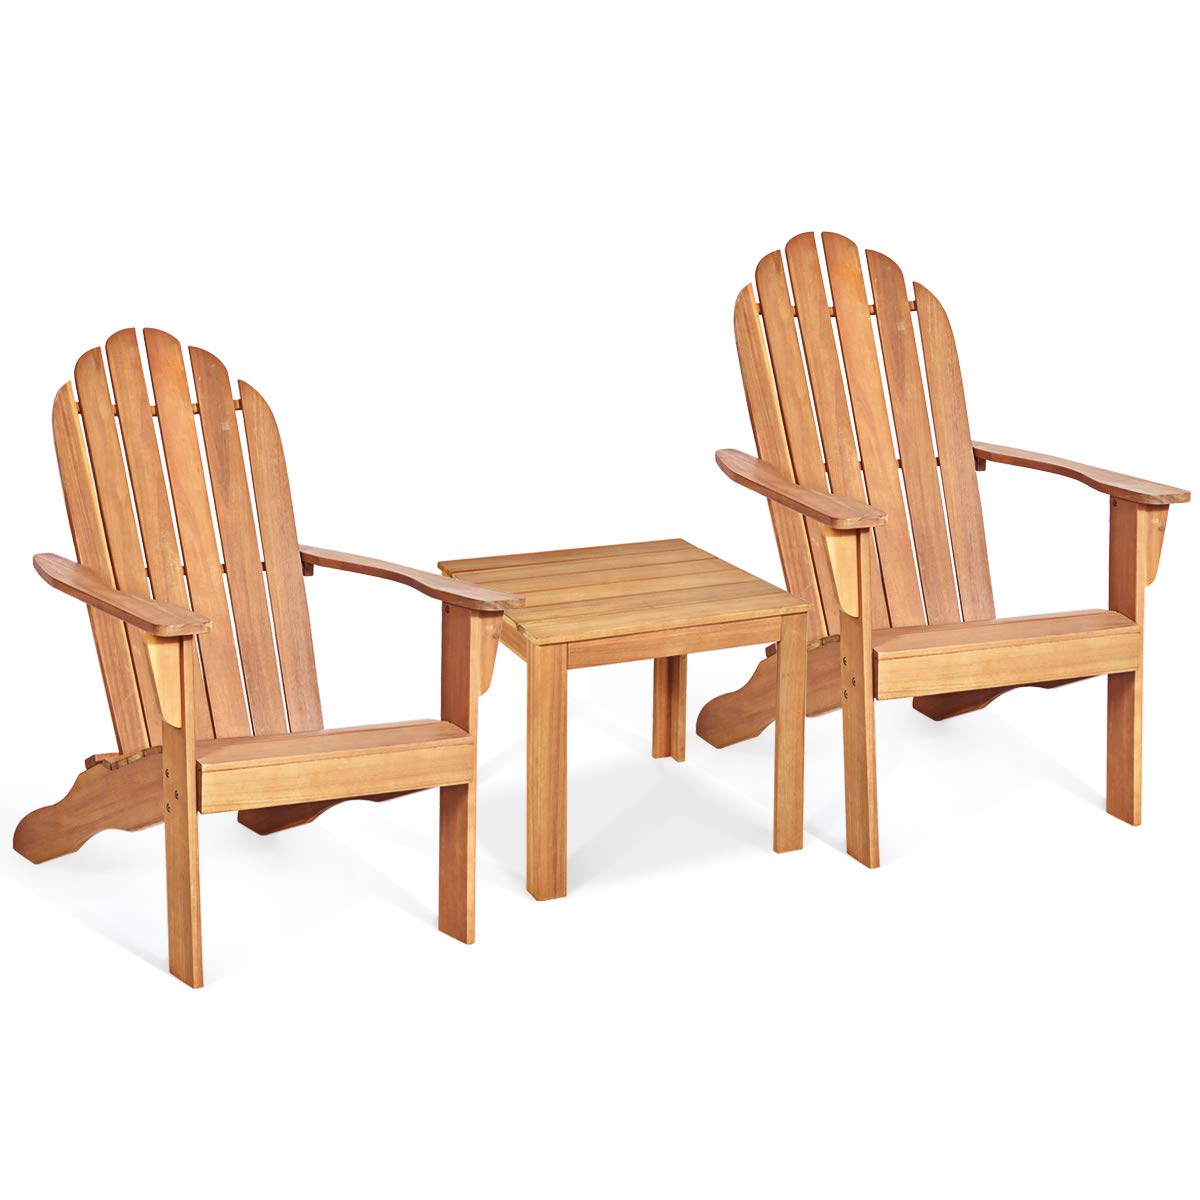 Giantex Adirondack Chairs and Table Set 3PCS Wooden W/Two Lounger Chairs and One Side Table for Yard, Patio, Garden, Poolside and Balcony